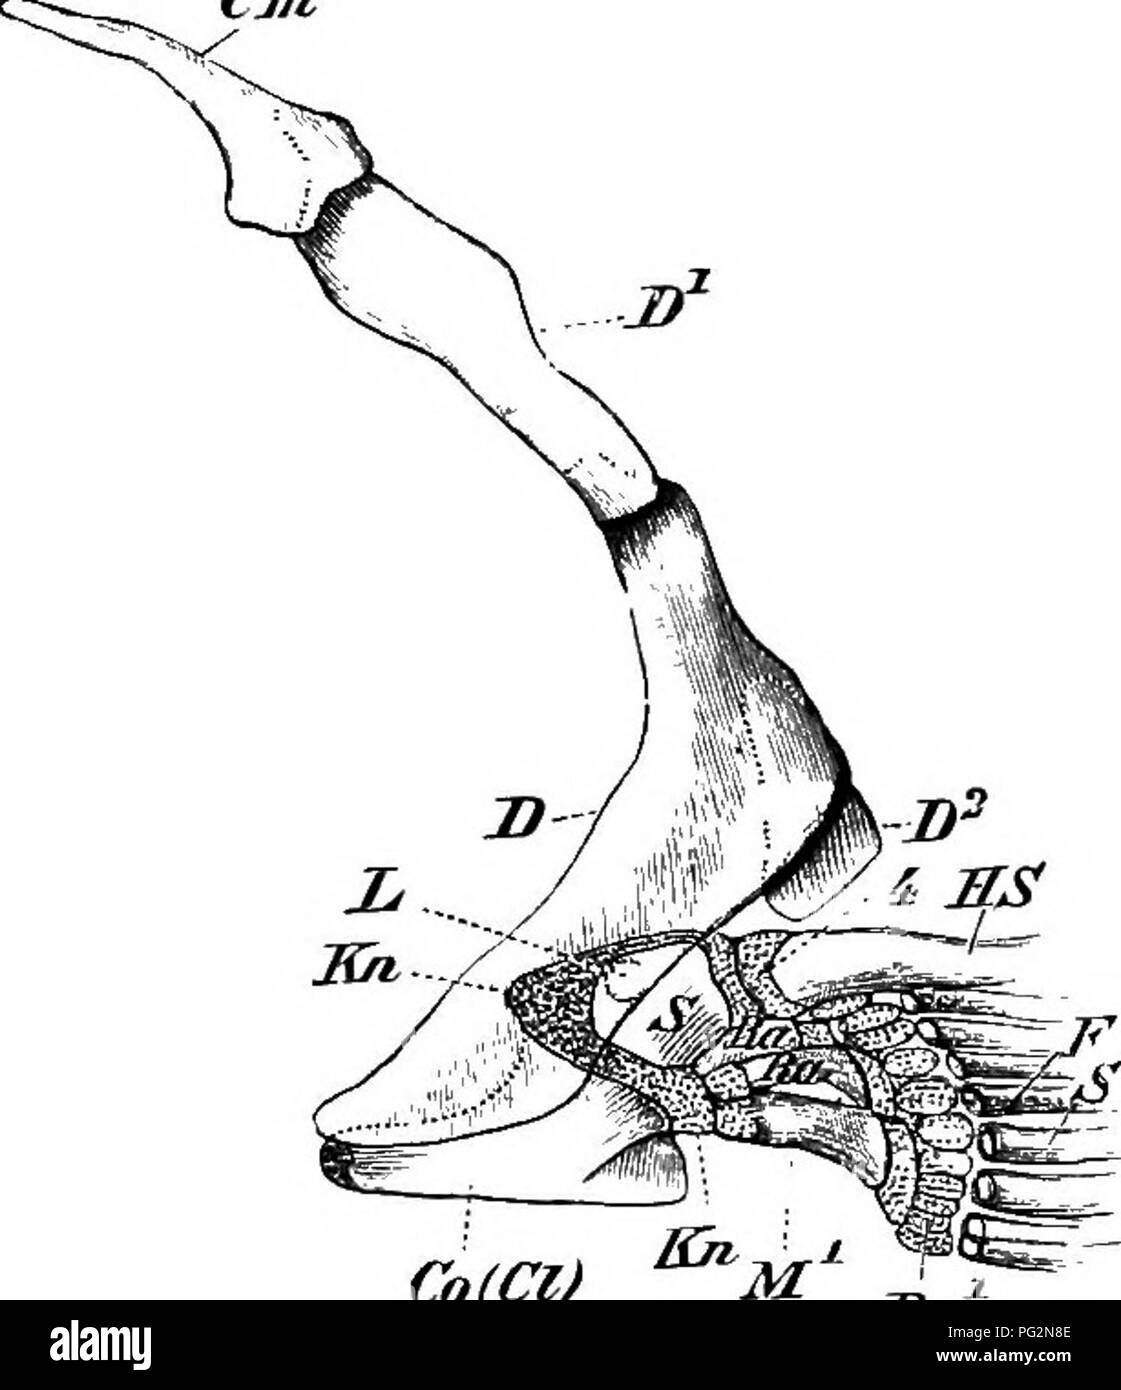 . Elements of the comparative anatomy of vertebrates. Anatomy, Comparative. PECTORAL ARCH 107 Cm. and outer circumference of the (primary) arch, conveii articulations being formed on the arch which fit into concave facets on the fin, the point of attachment of which may be taken as separating the arch into an upper dorsal and a lower ventral section. The former, which may exceptionally be connected with the vertebral column (viz., Raiidse), cor- responds to a scapula, and the latter to a coracoicl plus procoracoid of the higher Vertebrata.i In Teleosts and Bony Oanoids the bony (secondary) arc Stock Photo